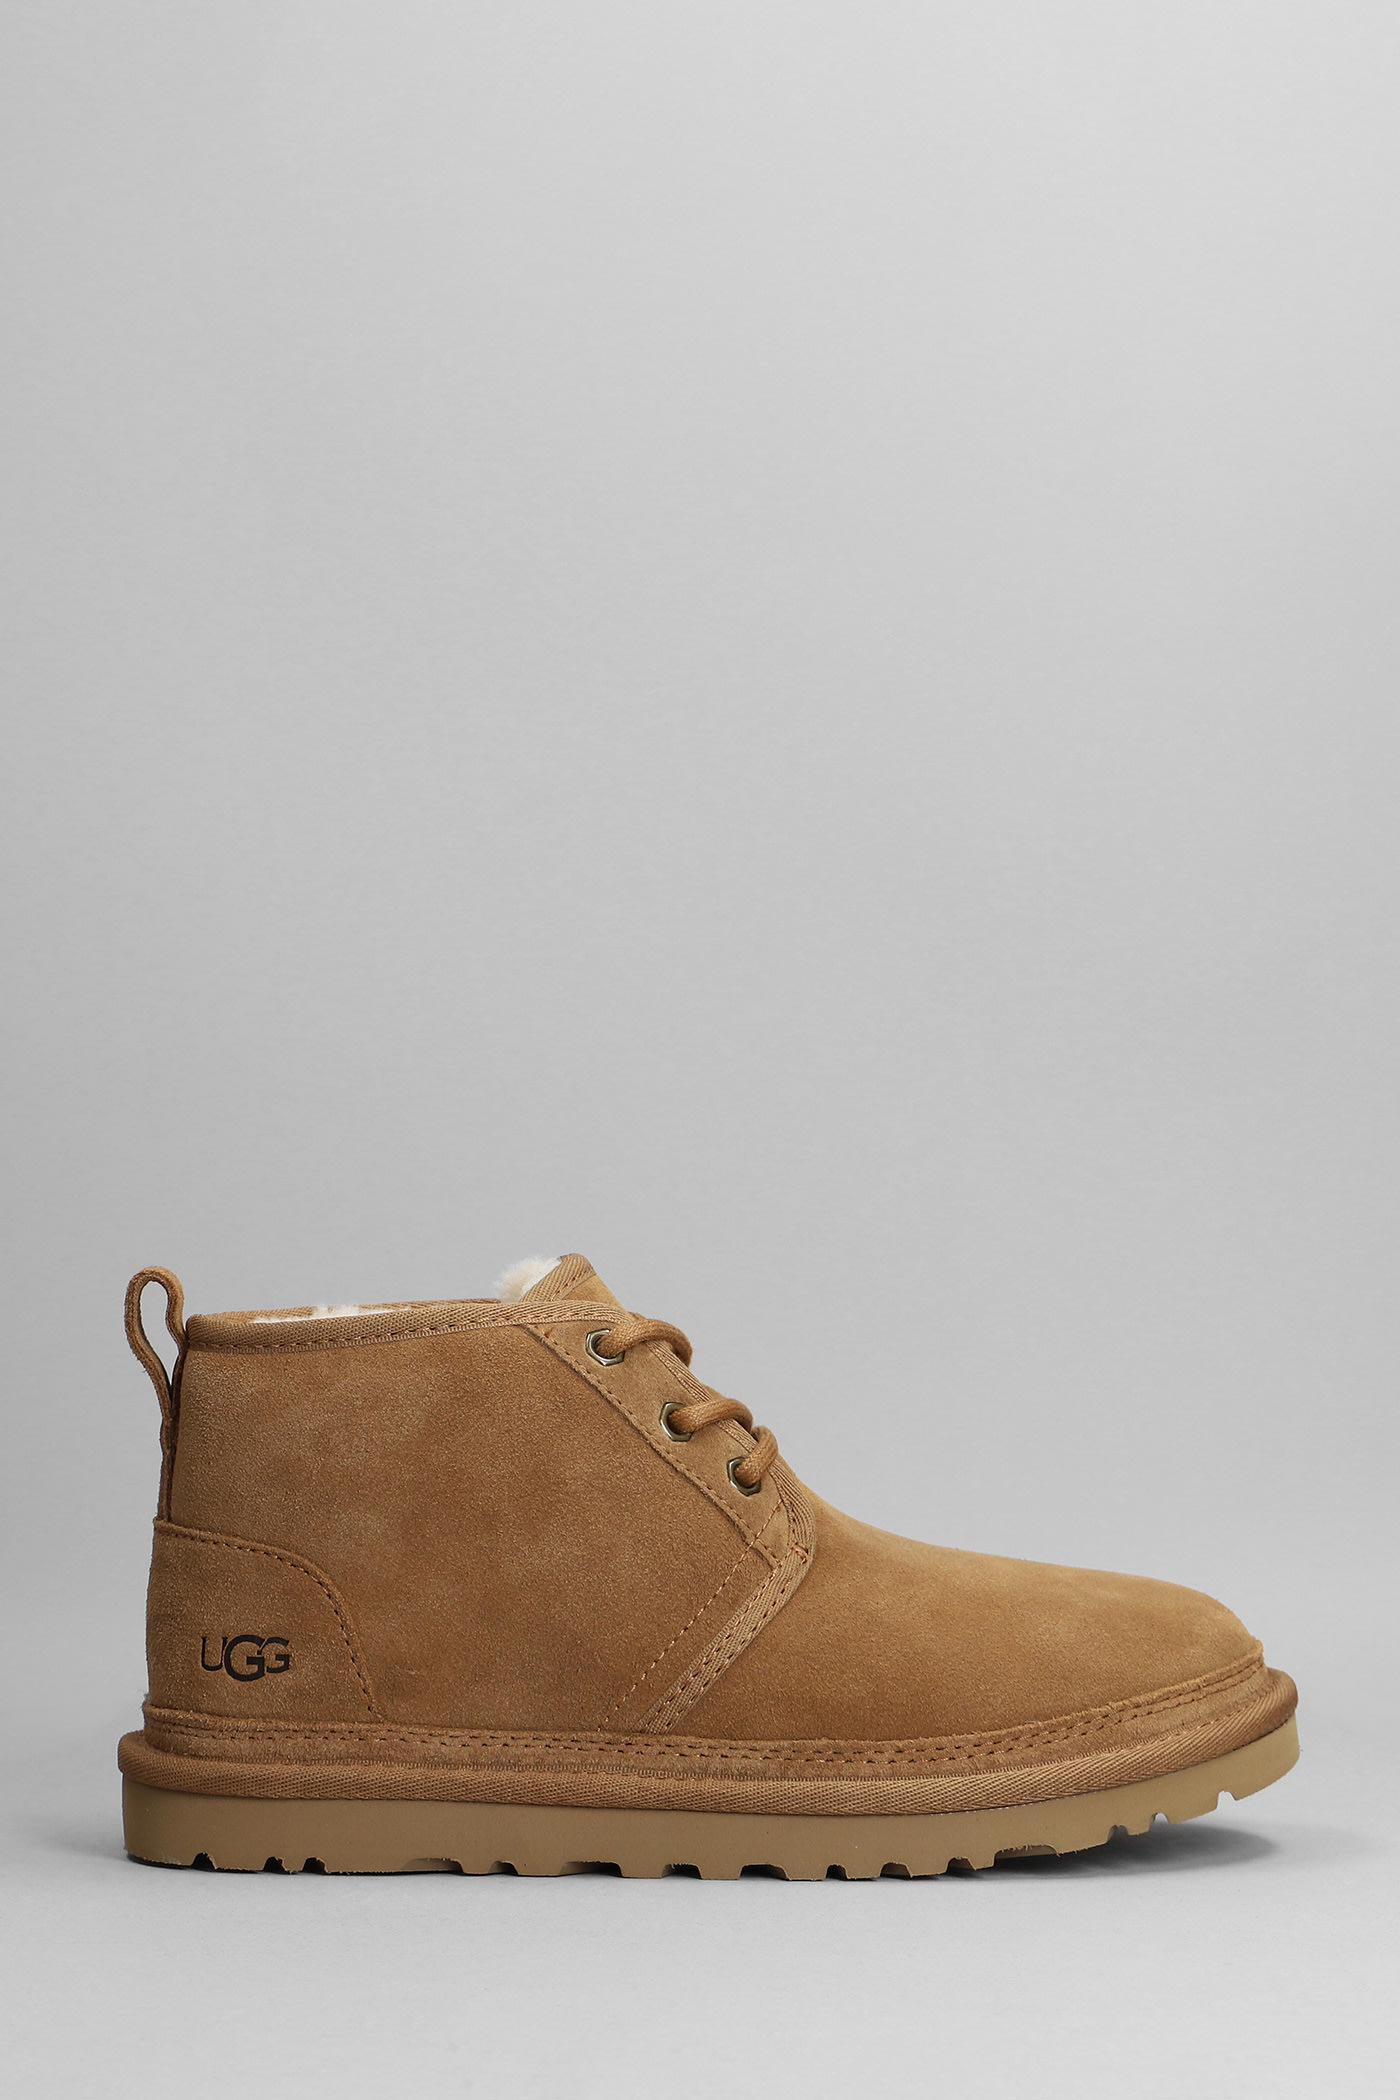 UGG Neumel Lace Up Shoes In Leather Color Suede